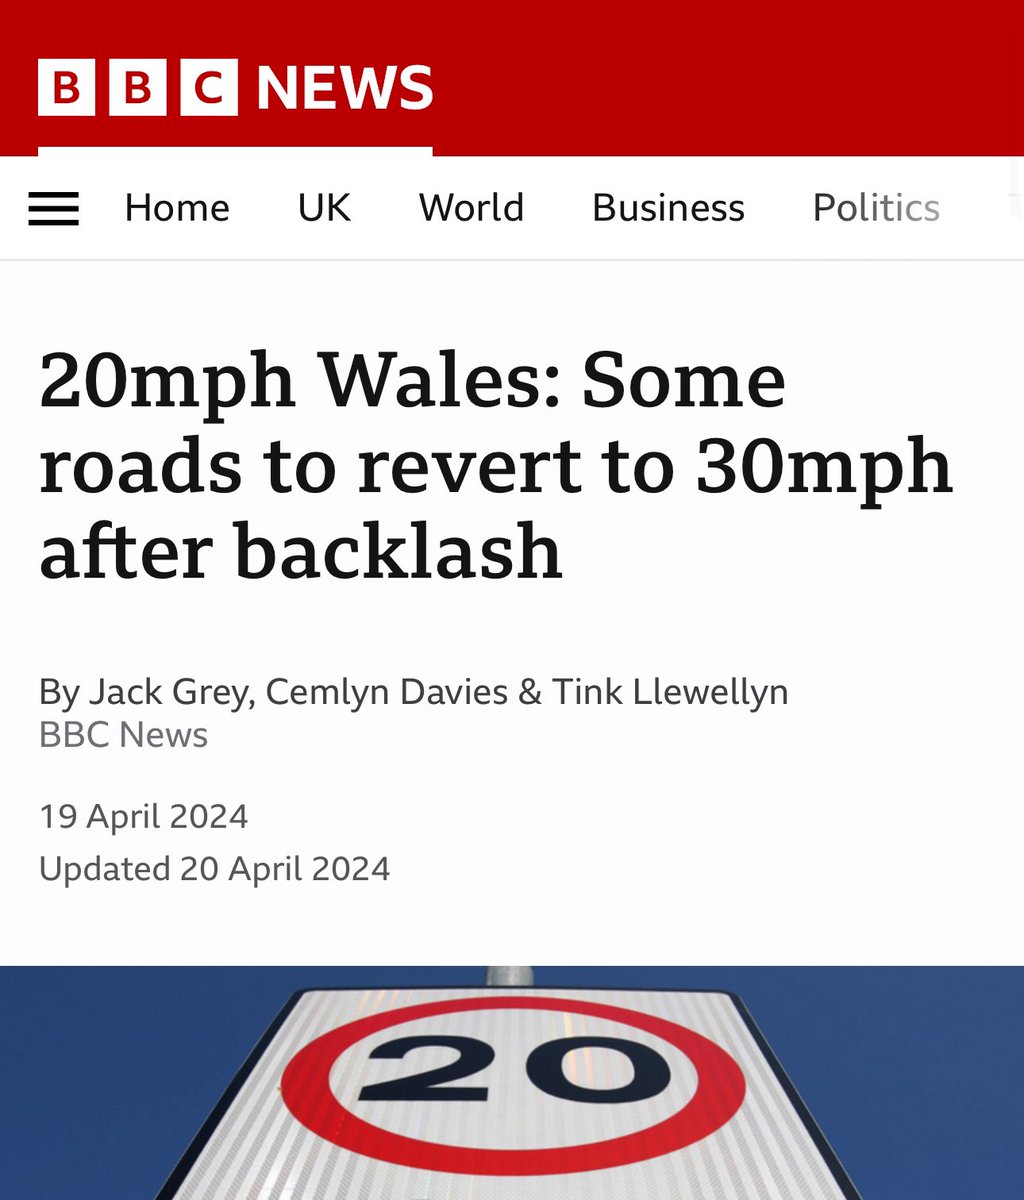 🚨 The Welsh Government has FINALLY admitted defeat and announced that some 20mph speed limits will be reverted back to 30mph. Schools, hospitals and other busy areas will stay at 20mph, which is perfectly reasonable in my opinion. Well done to all who fought back.